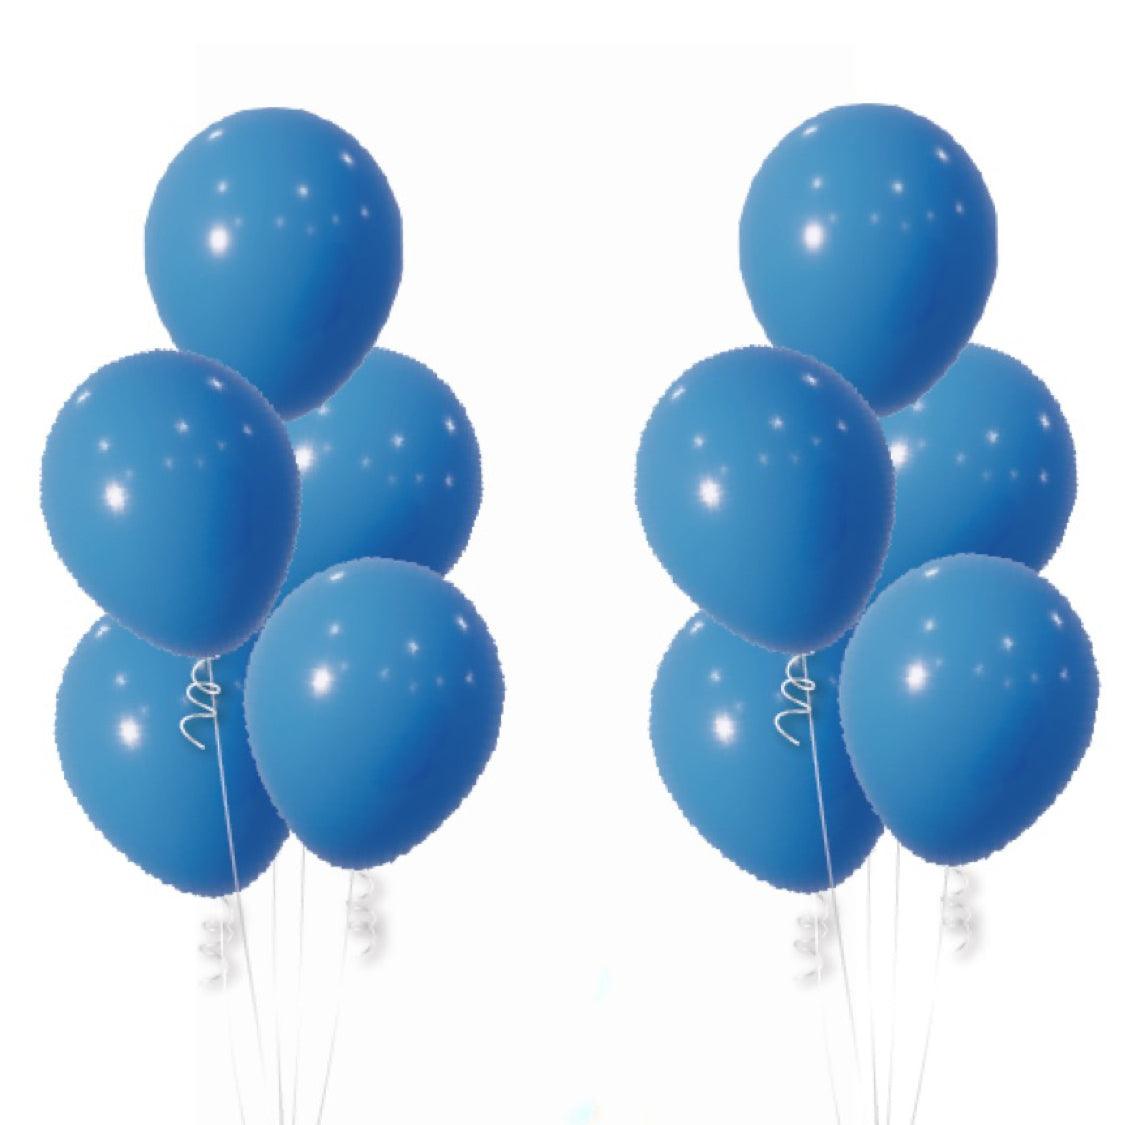 Royal blue helium balloon 2 bouquets of 5 - ONE UP BALLOONS